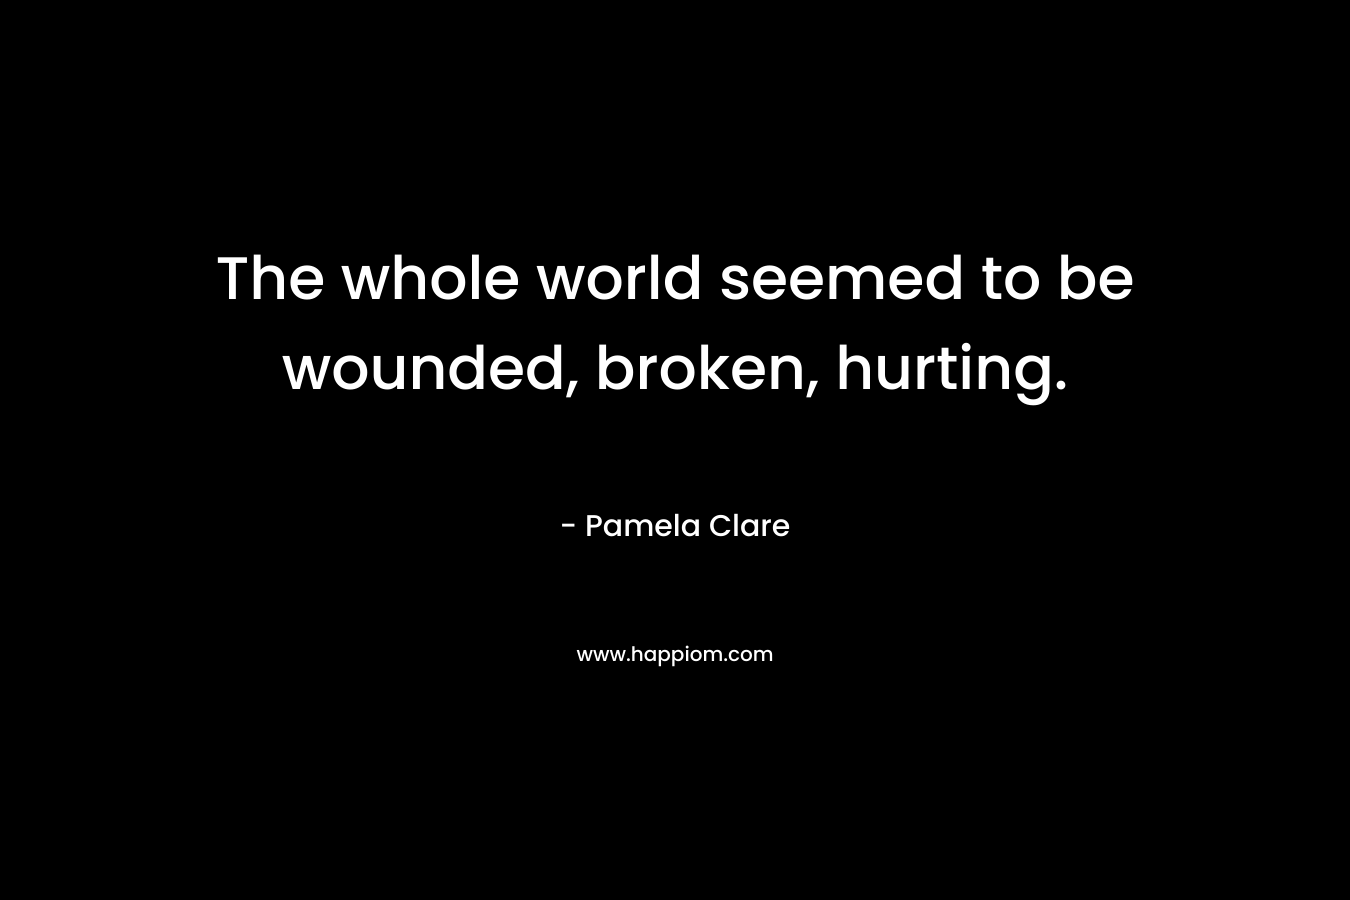 The whole world seemed to be wounded, broken, hurting.